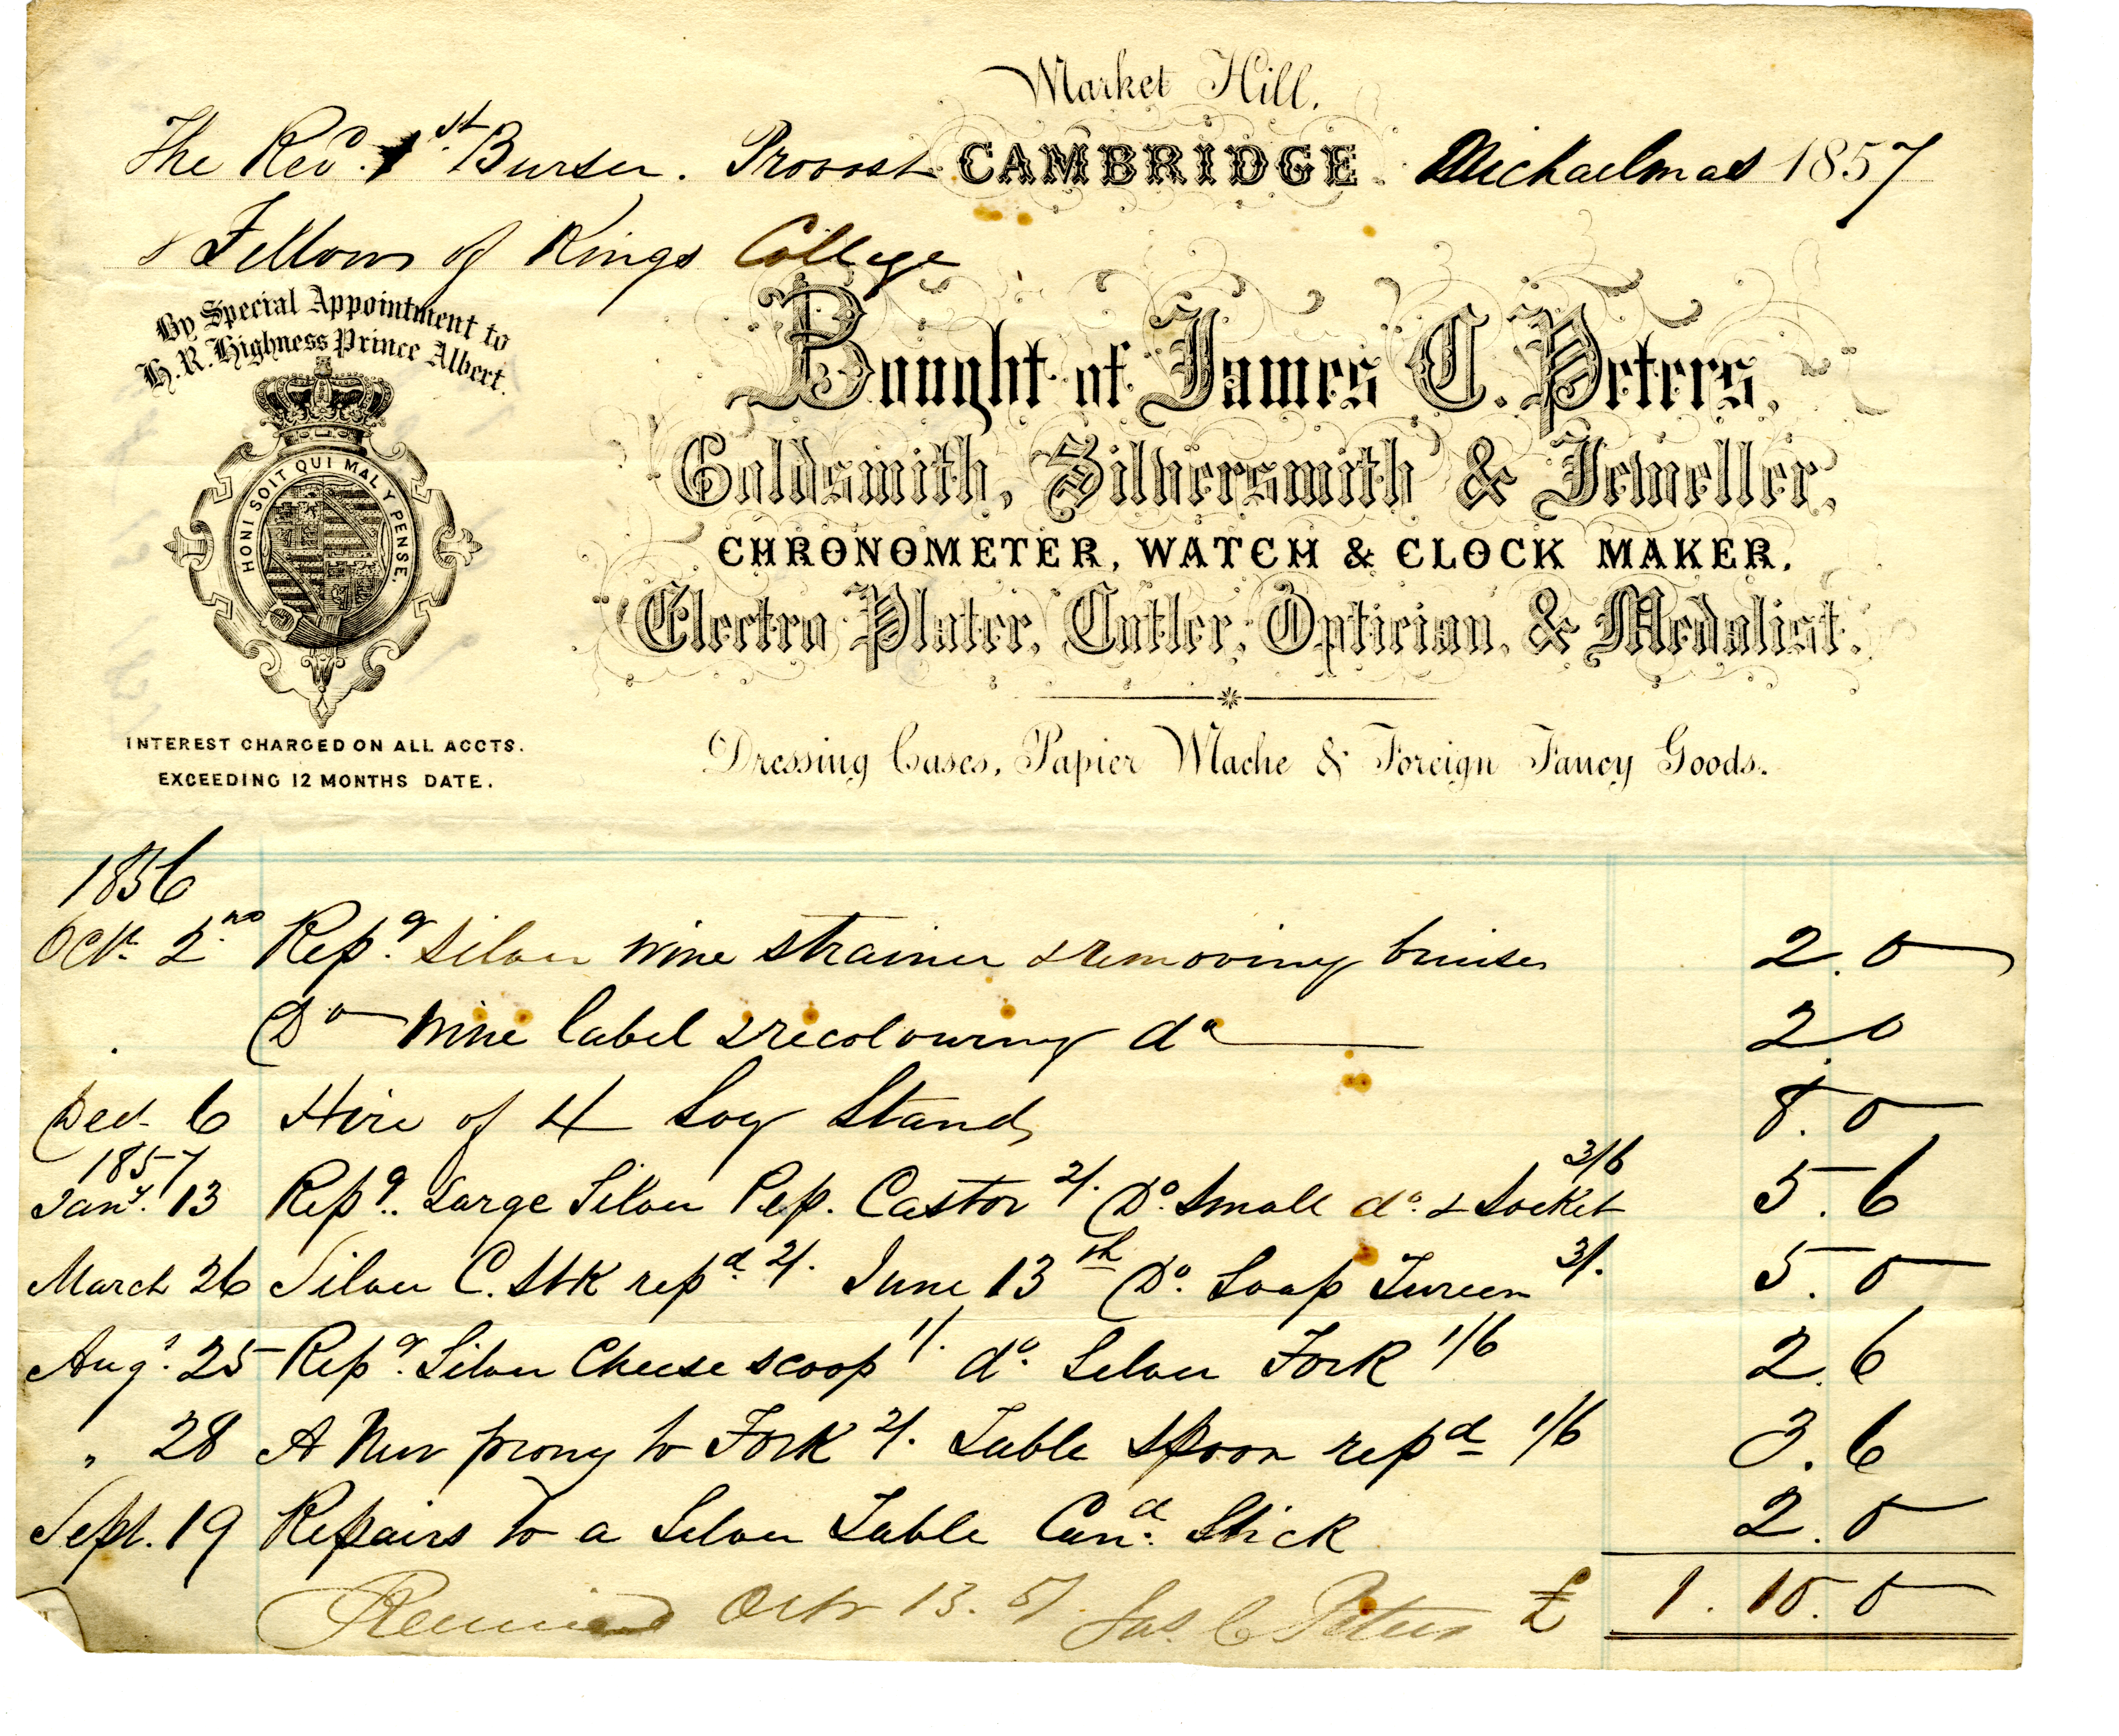 Receipt from James C. Peters in 1857 for repairs to a candlestick, a wine strainer and a cheese scoop. Peters also added a new prong to a fork.